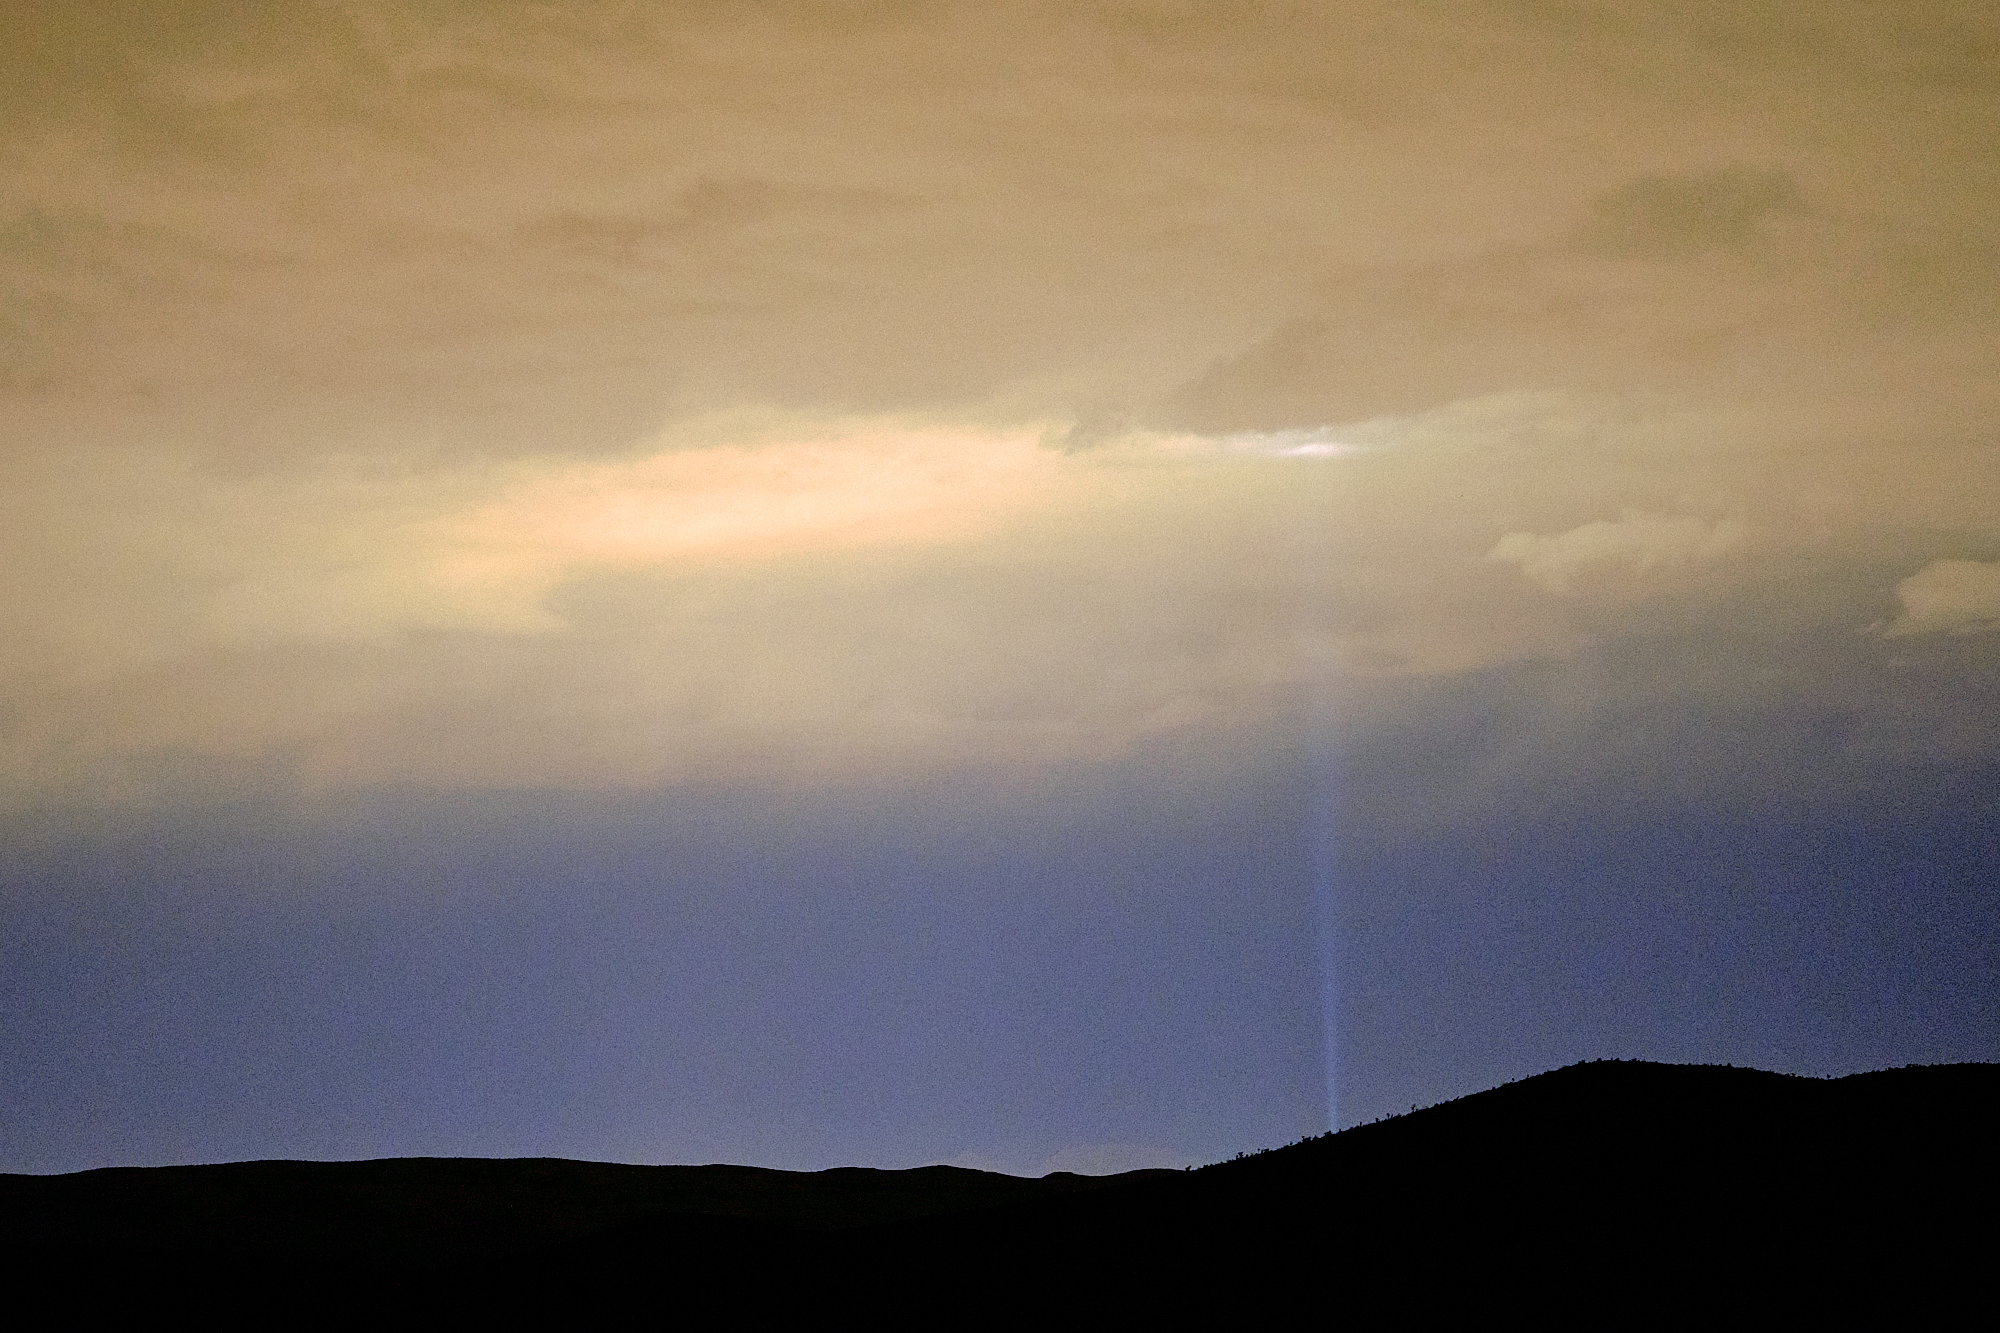  Terrible light pollution from Vegas. The beam of light is from the Luxor and is the brightest light in the world. For the past several years it has only run at half power due to it costing $20/hour to run. | Las Vegas, NV 10/7/18 